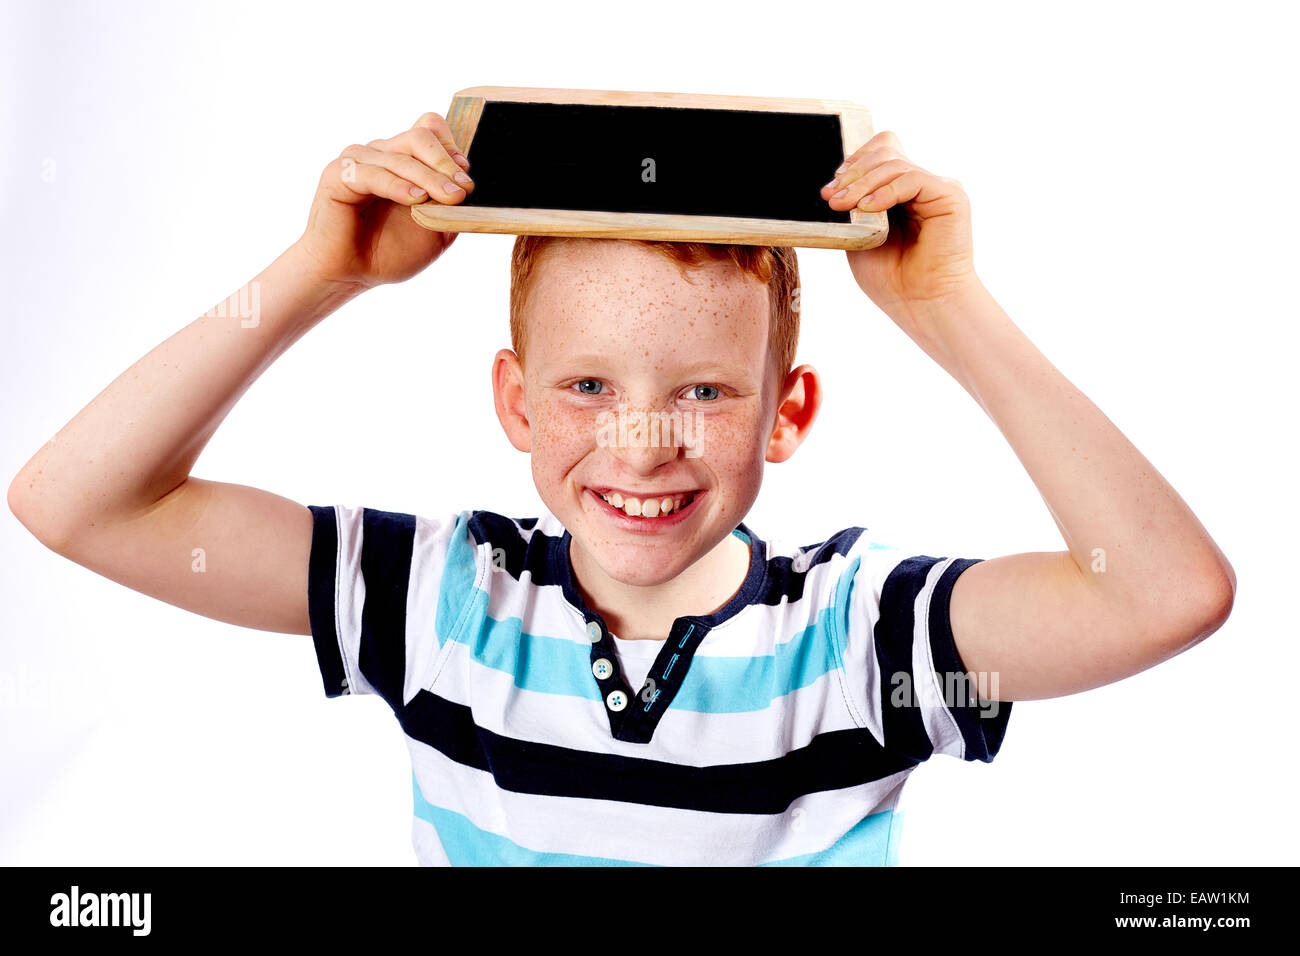 young boy with chalkboard Stock Photo